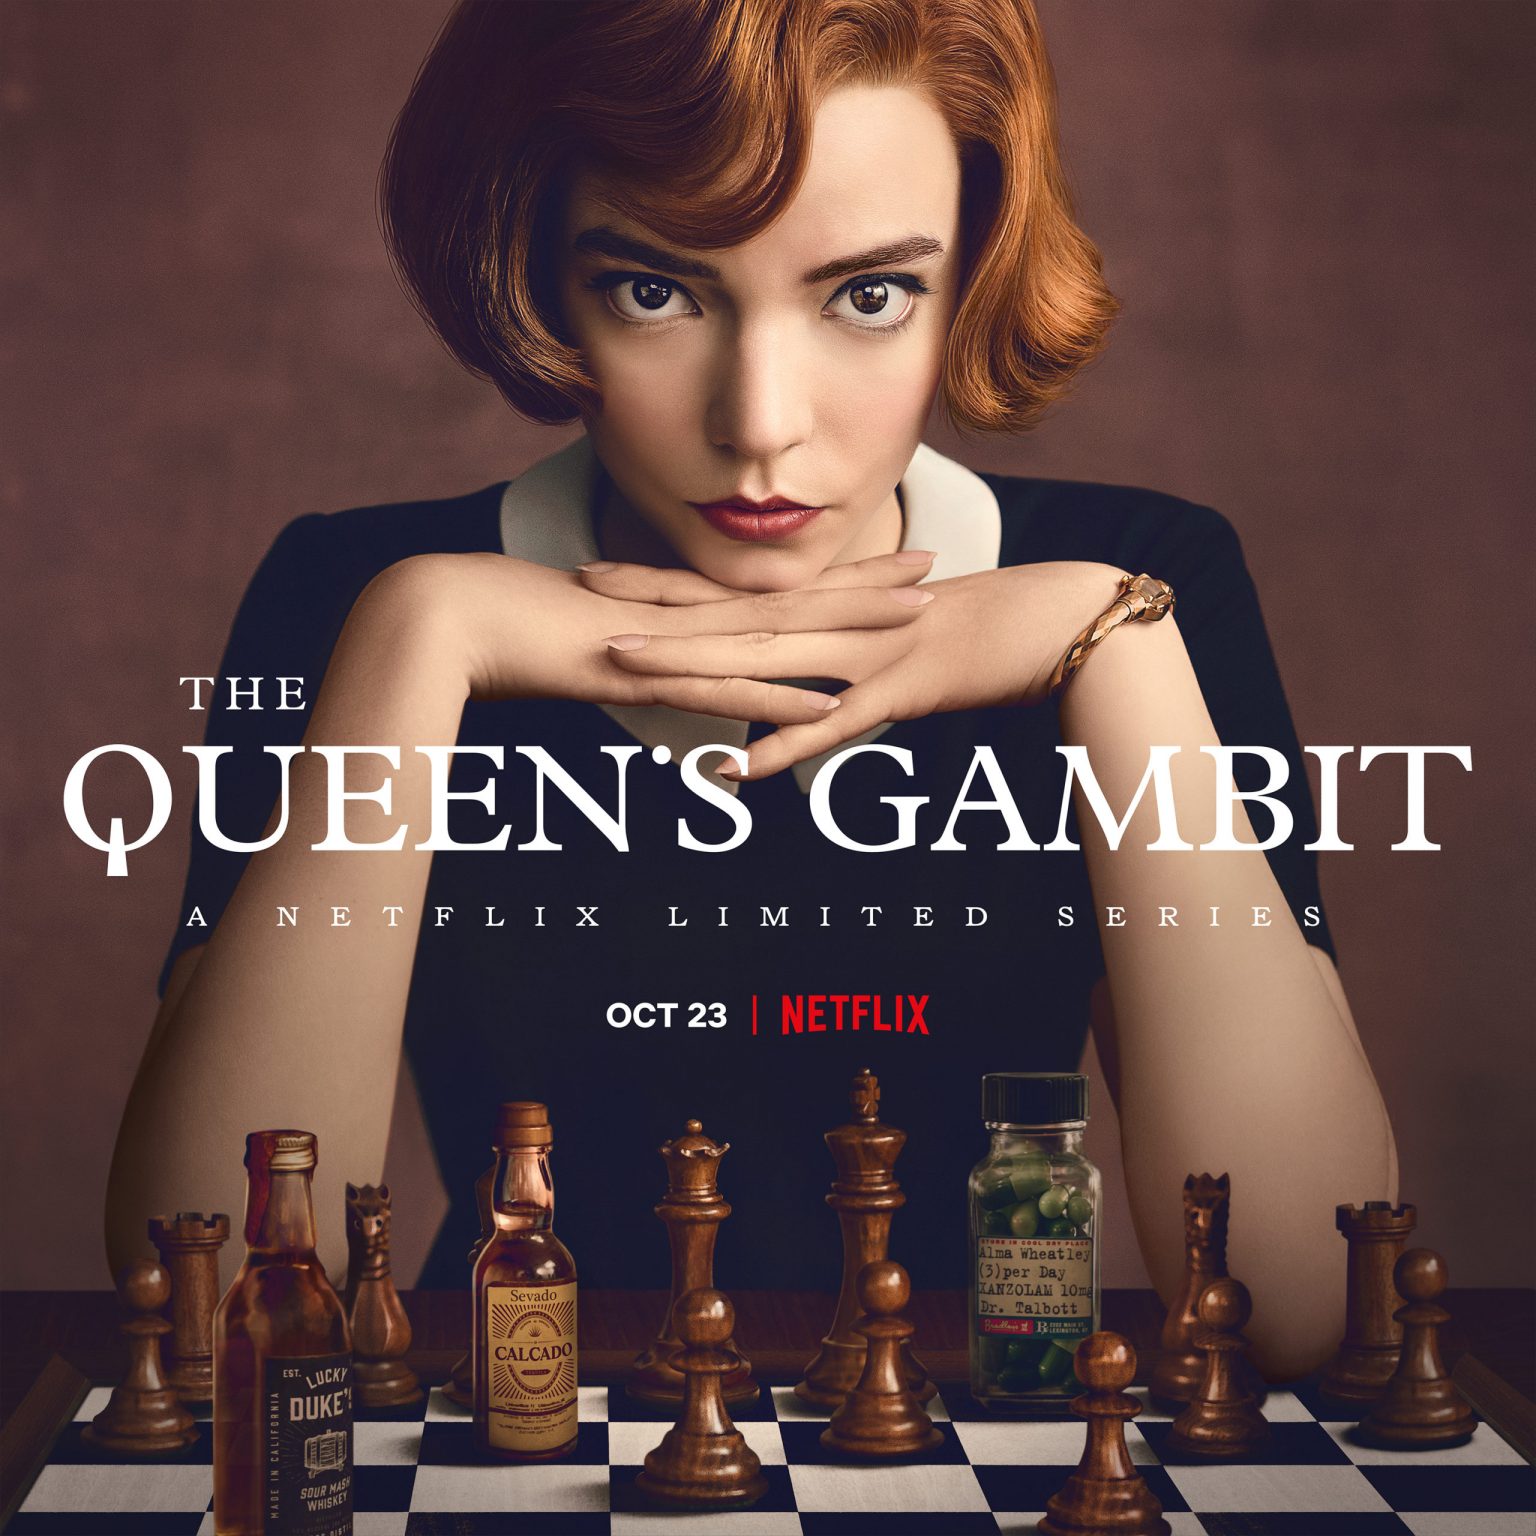 TV Review: ‘The Queen’s Gambit’ is an ode to passion, wisdom and ...